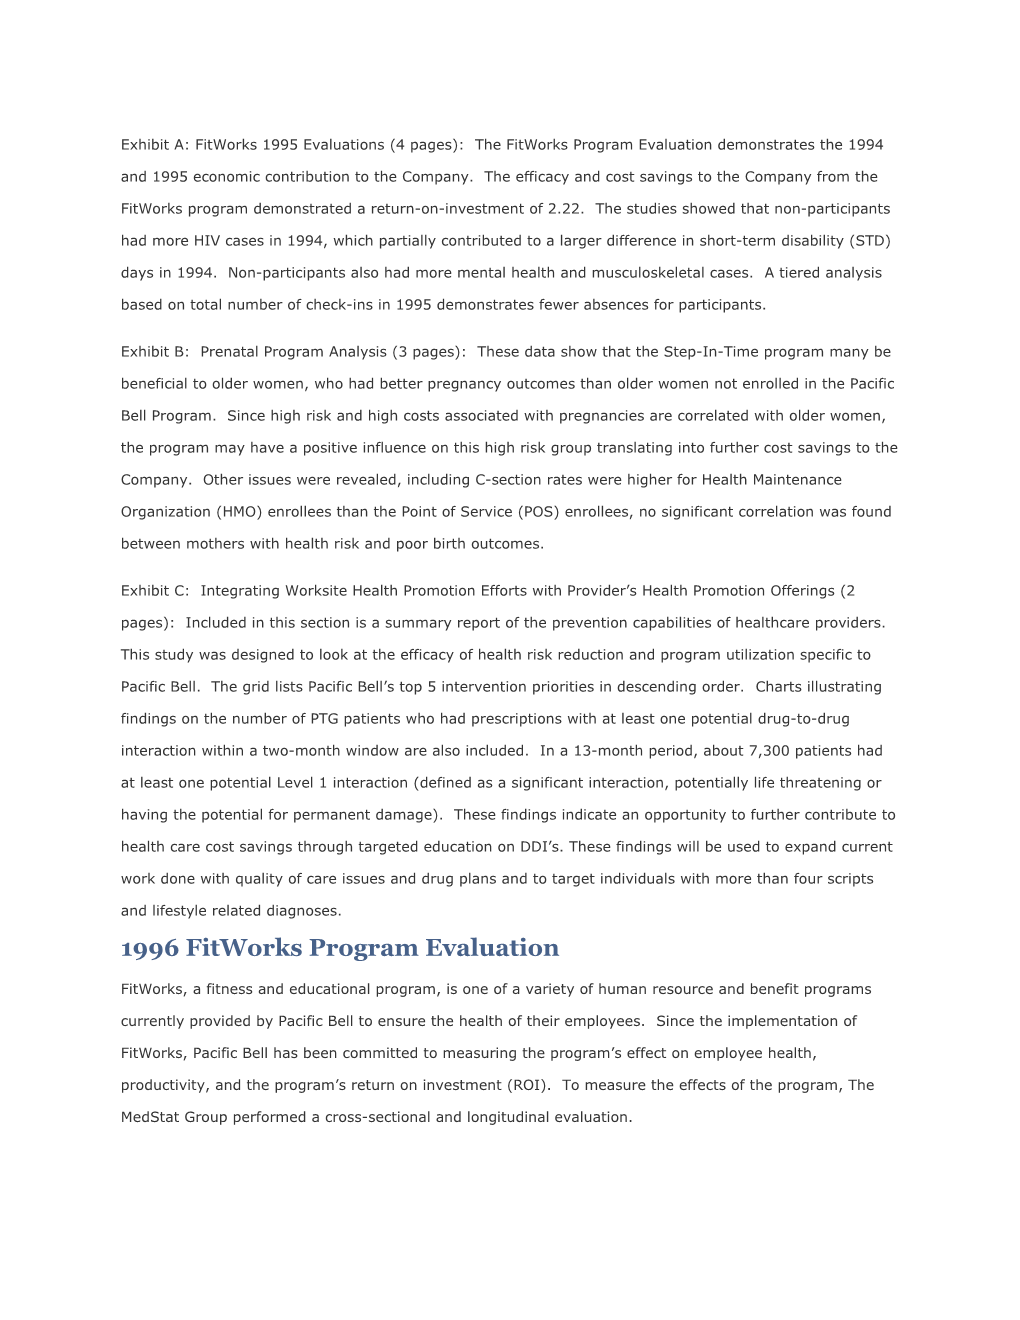 Exhibit A: Fitworks 1995 Evaluations (4 Pages): the Fitworks Program Evaluation Demonstrates